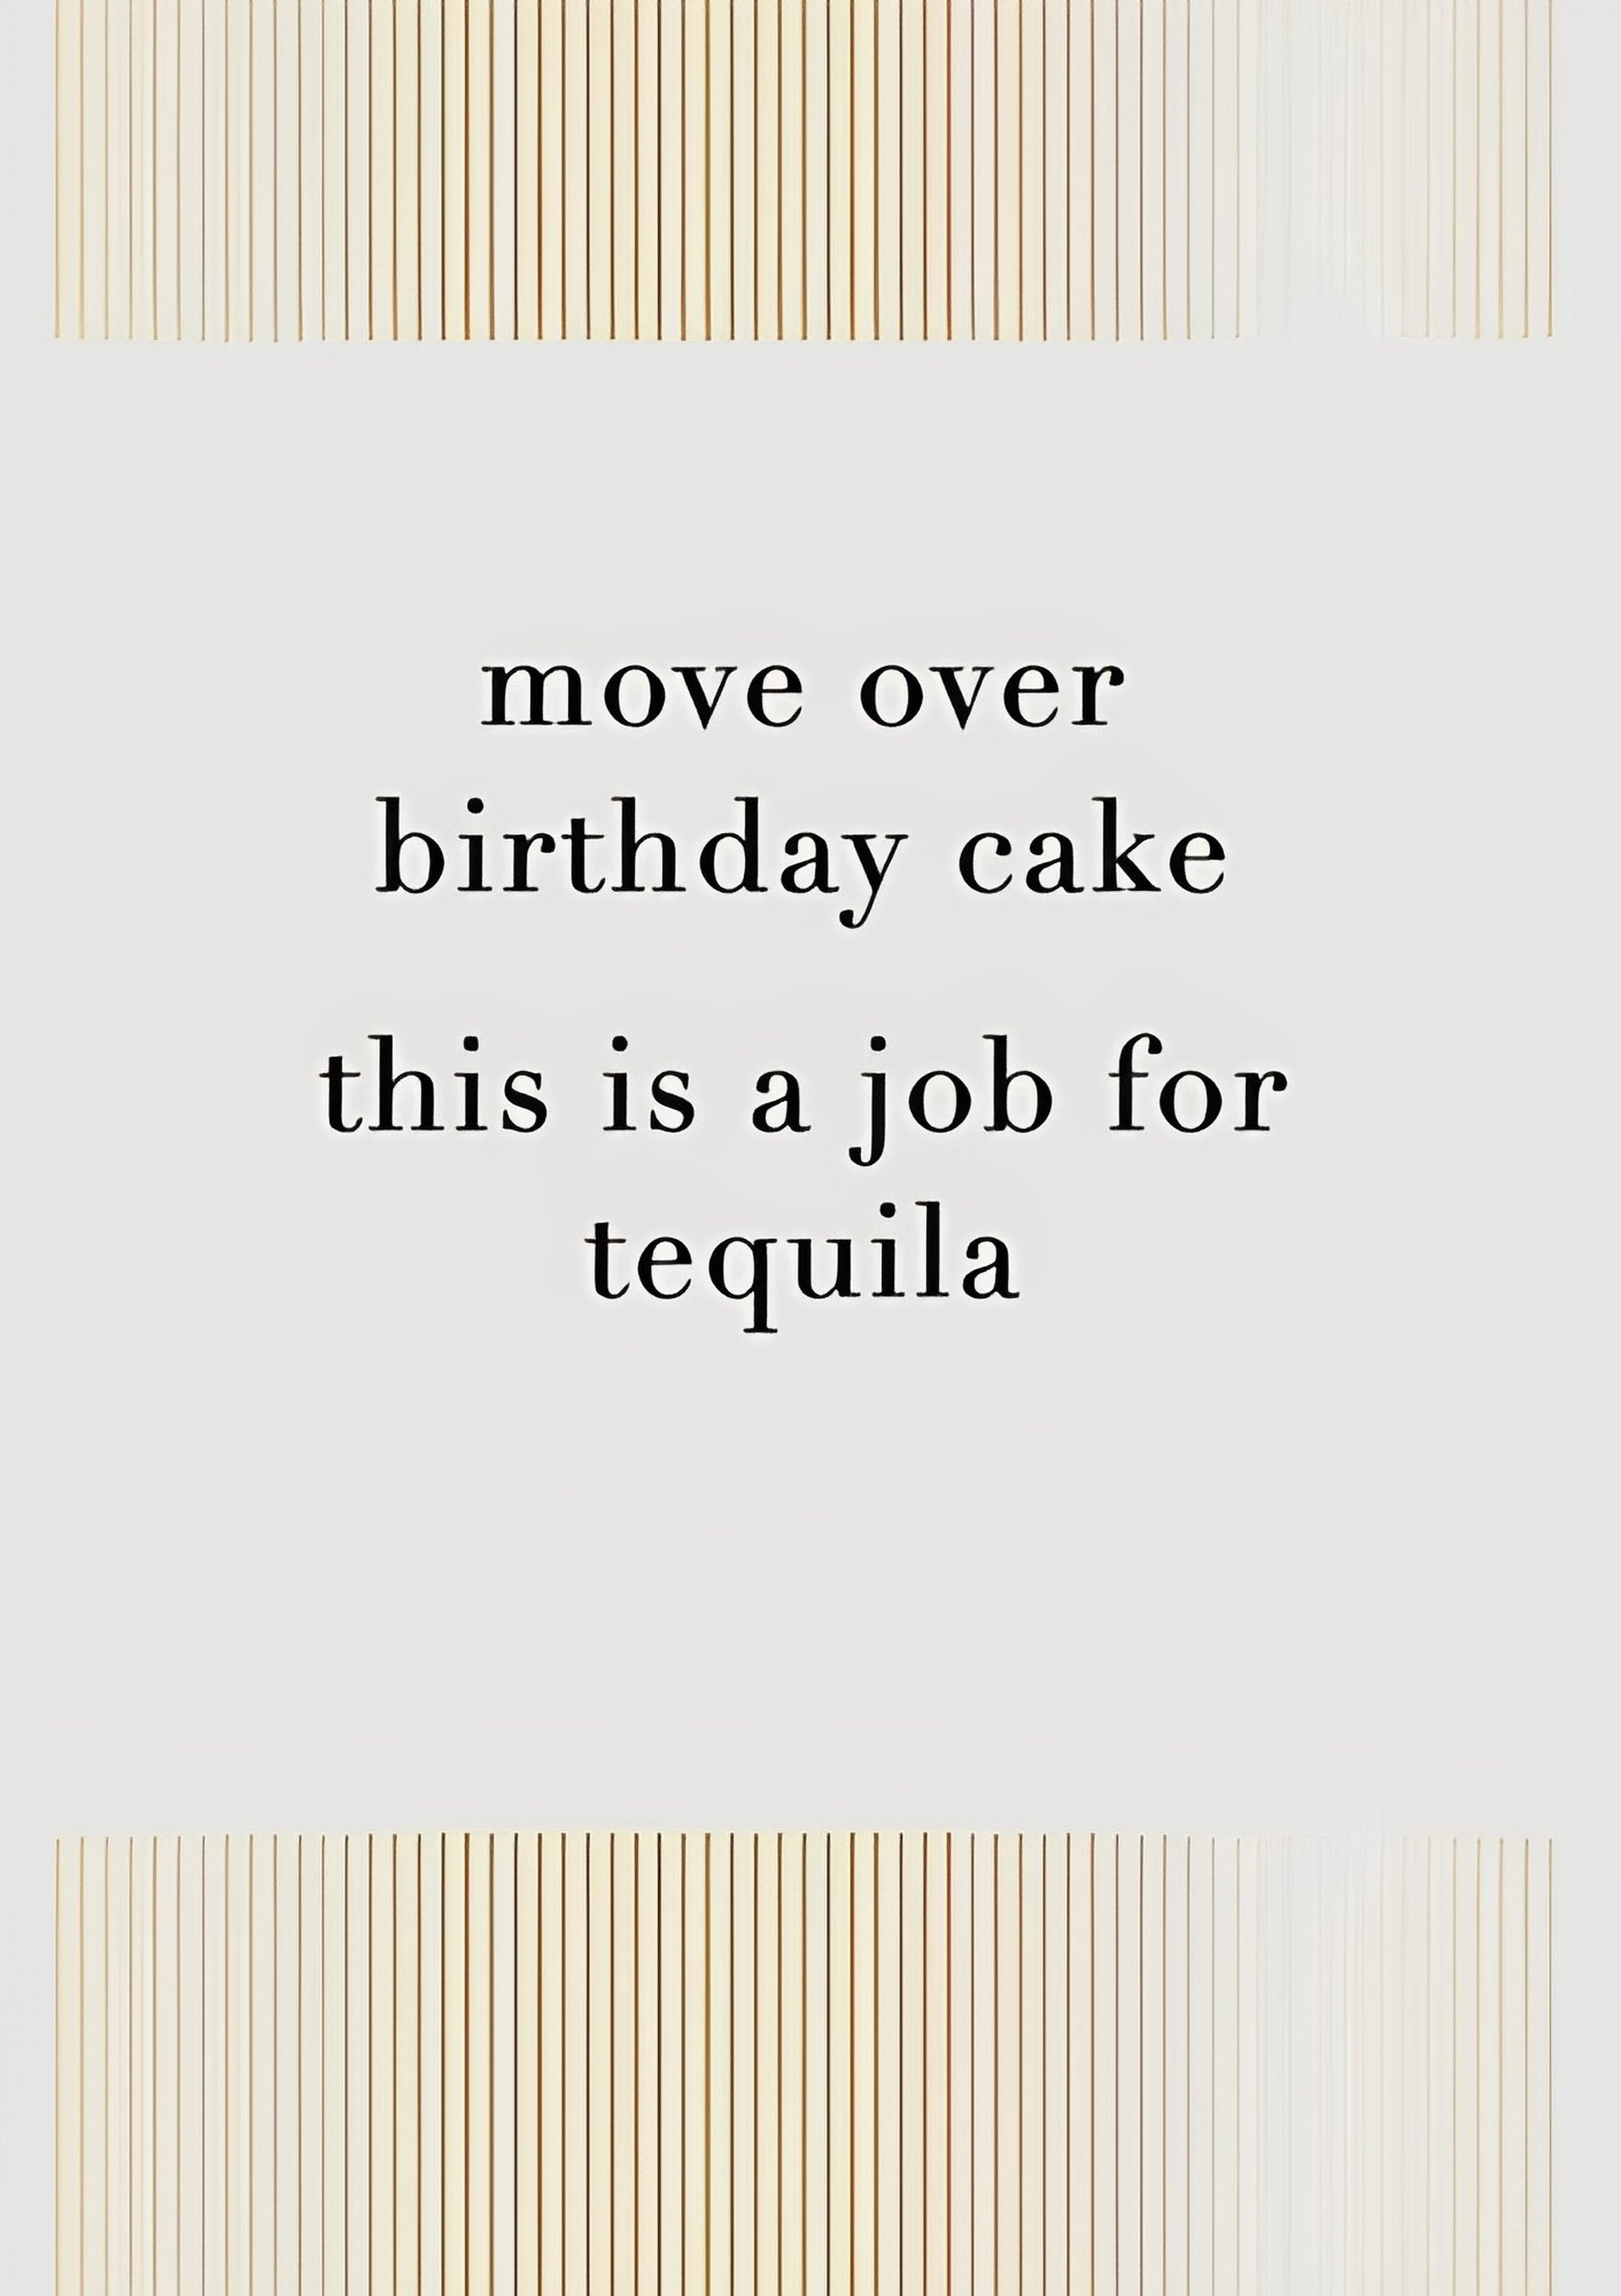 Job For Tequila Funny Birthday Card from Penny Black